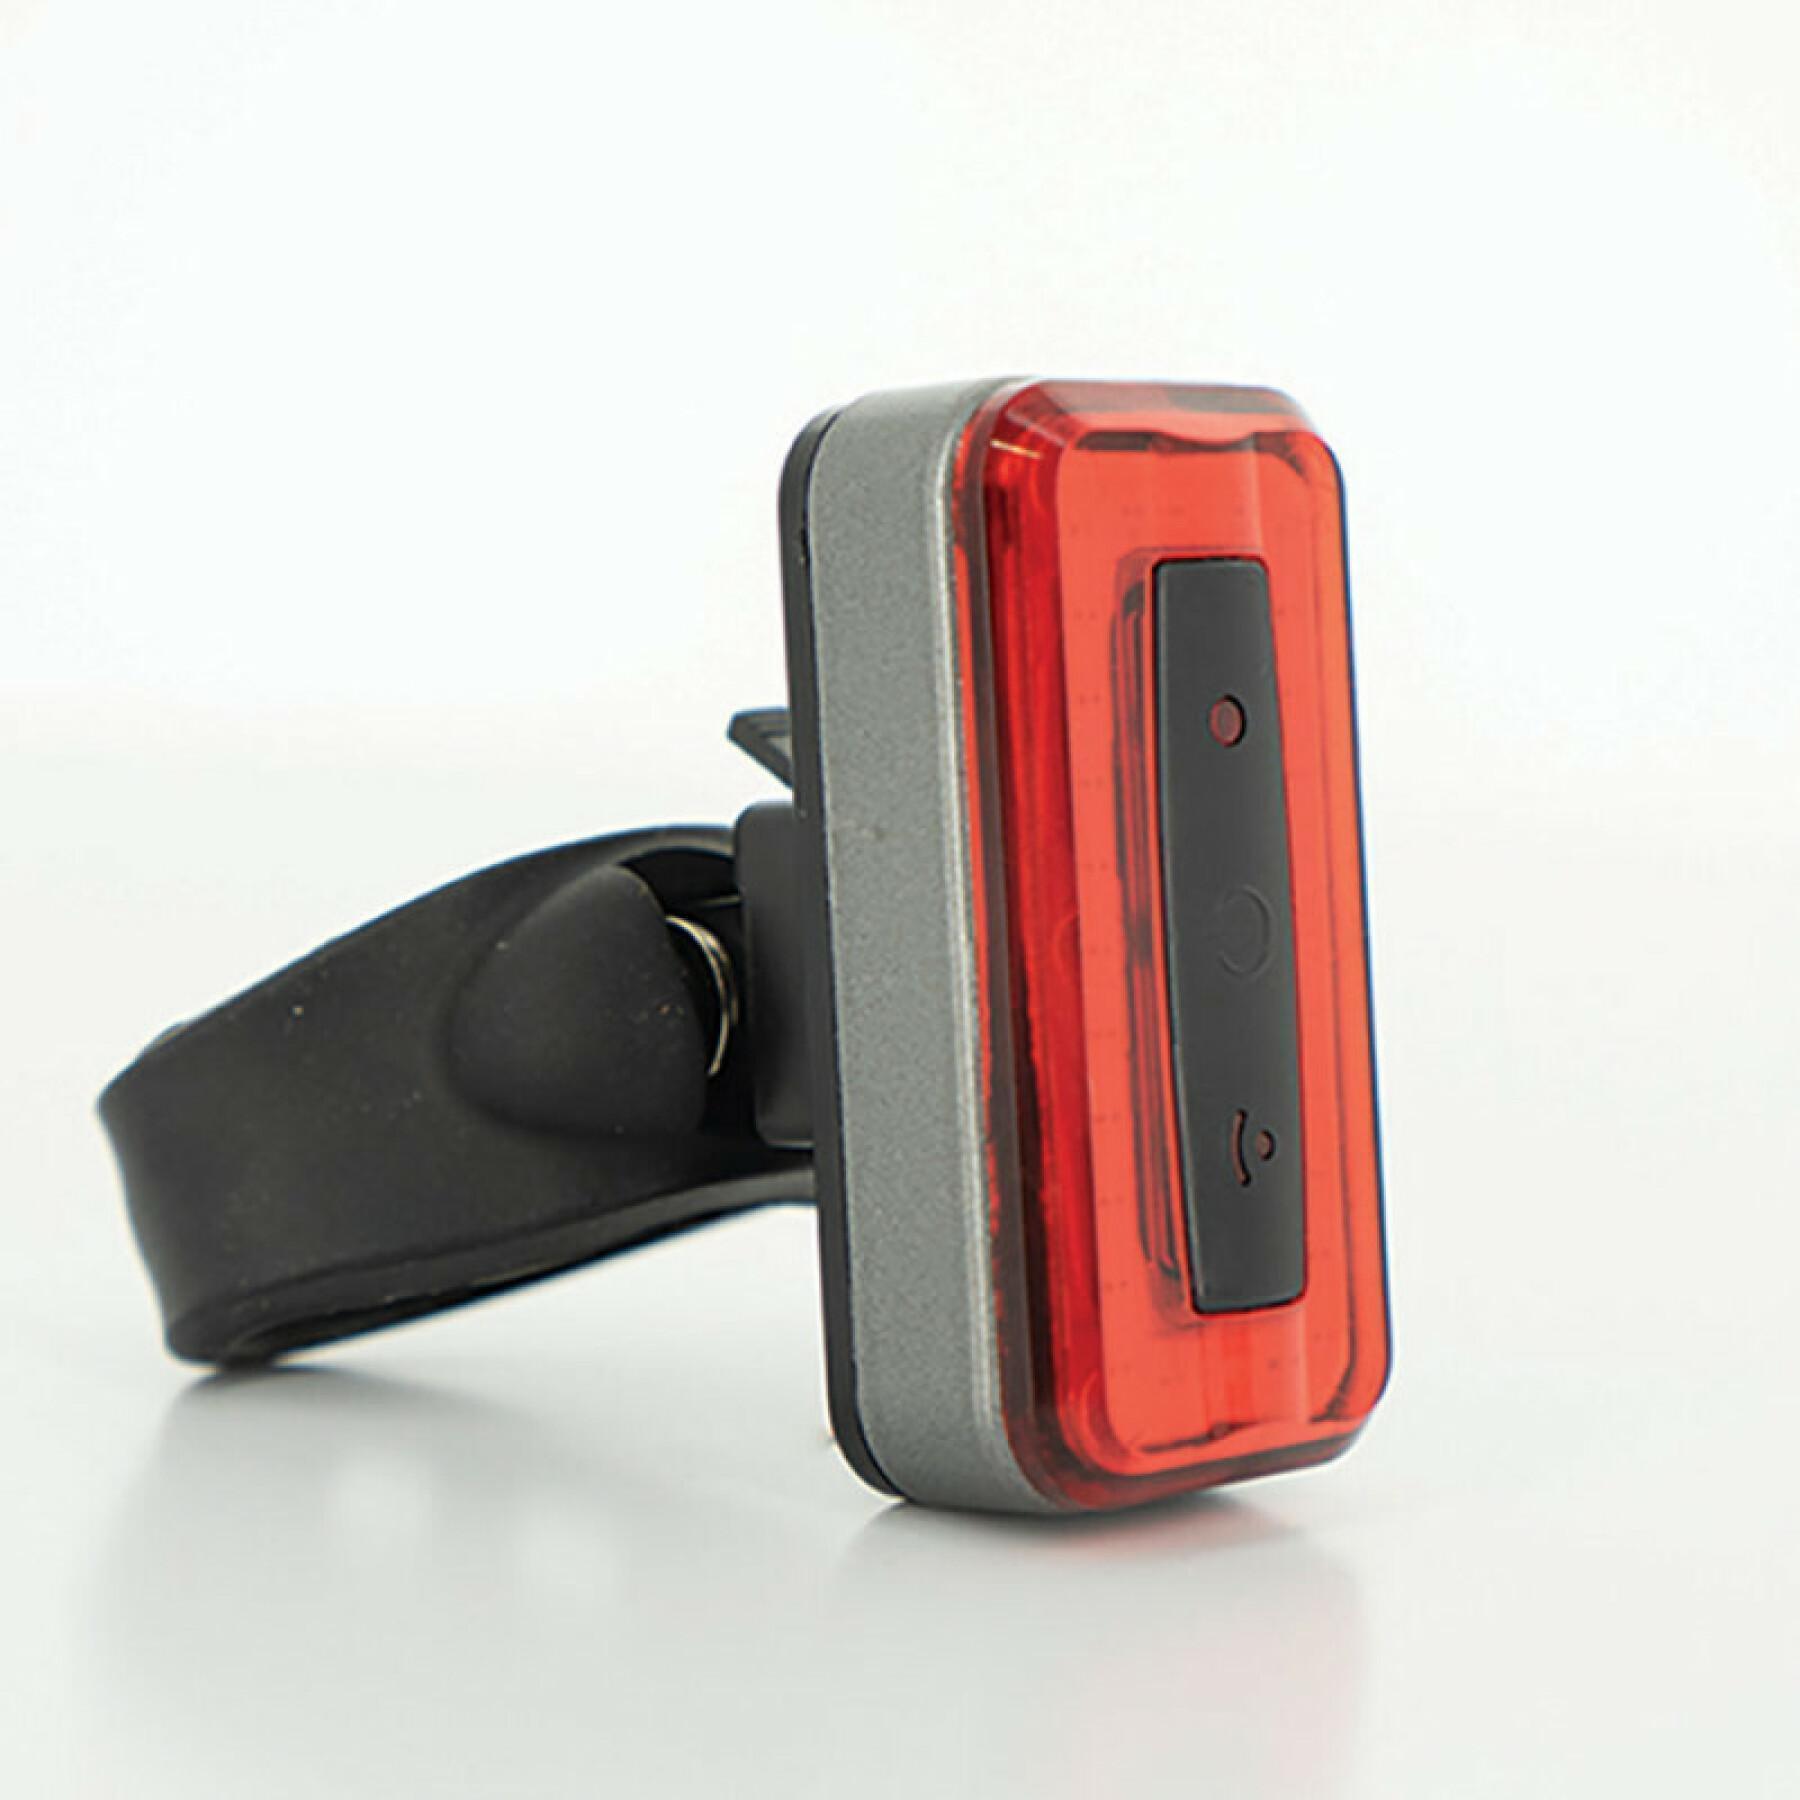 LED LAMPEGGIANTE ROSSO